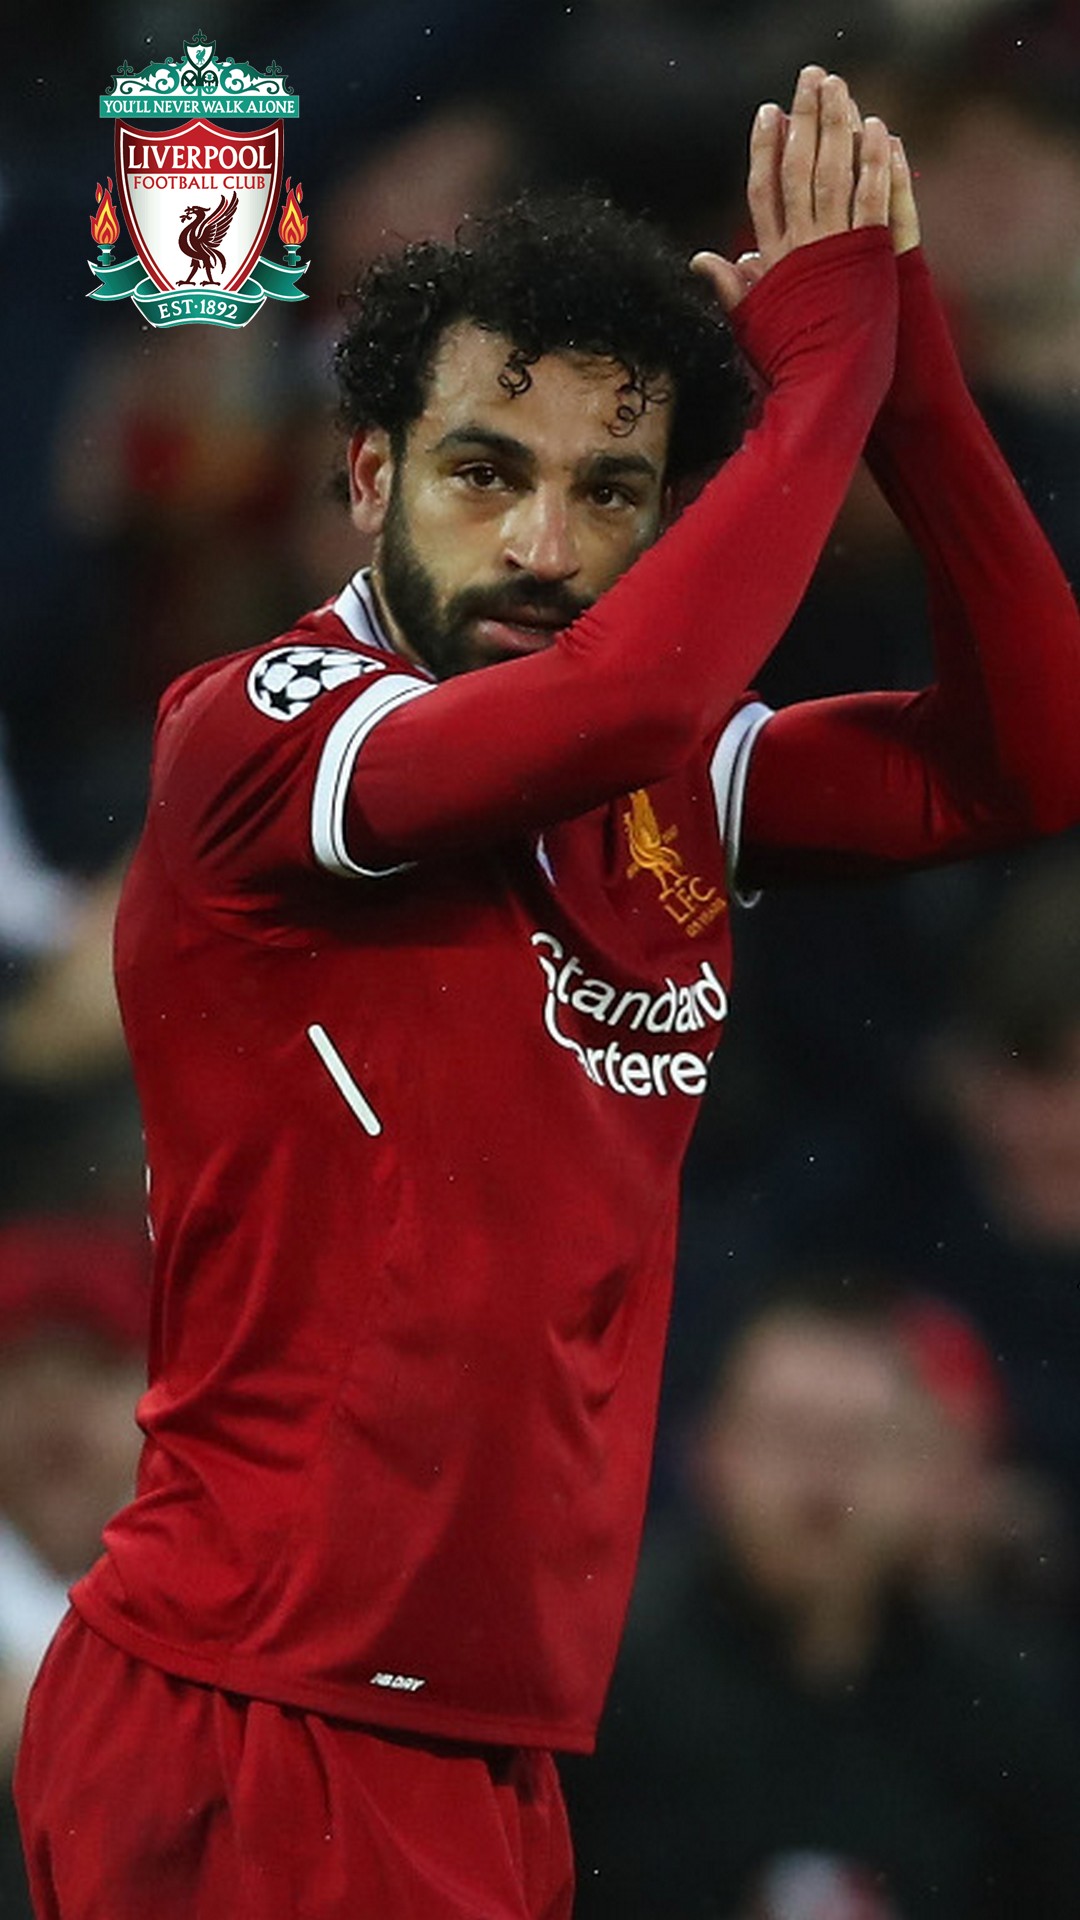 Wallpaper Android Mo Salah with image resolution 1080x1920 pixel. You can make this wallpaper for your Android backgrounds, Tablet, Smartphones Screensavers and Mobile Phone Lock Screen